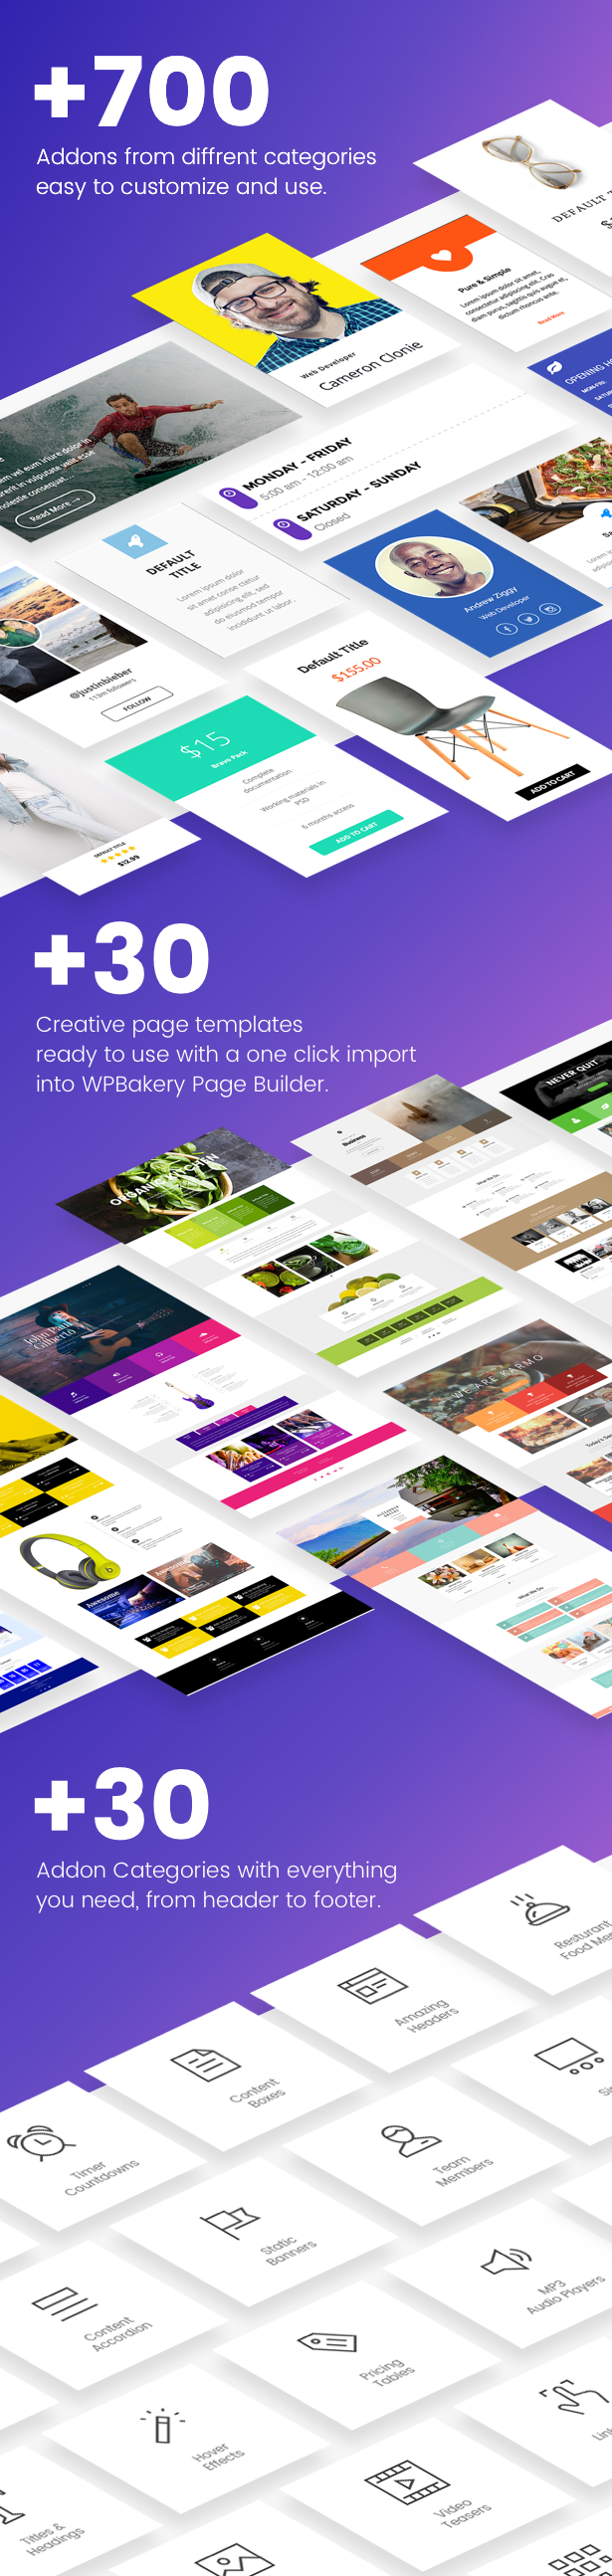 Unlimited Addons for WPBakery Page Builder (Visual Composer) - 2